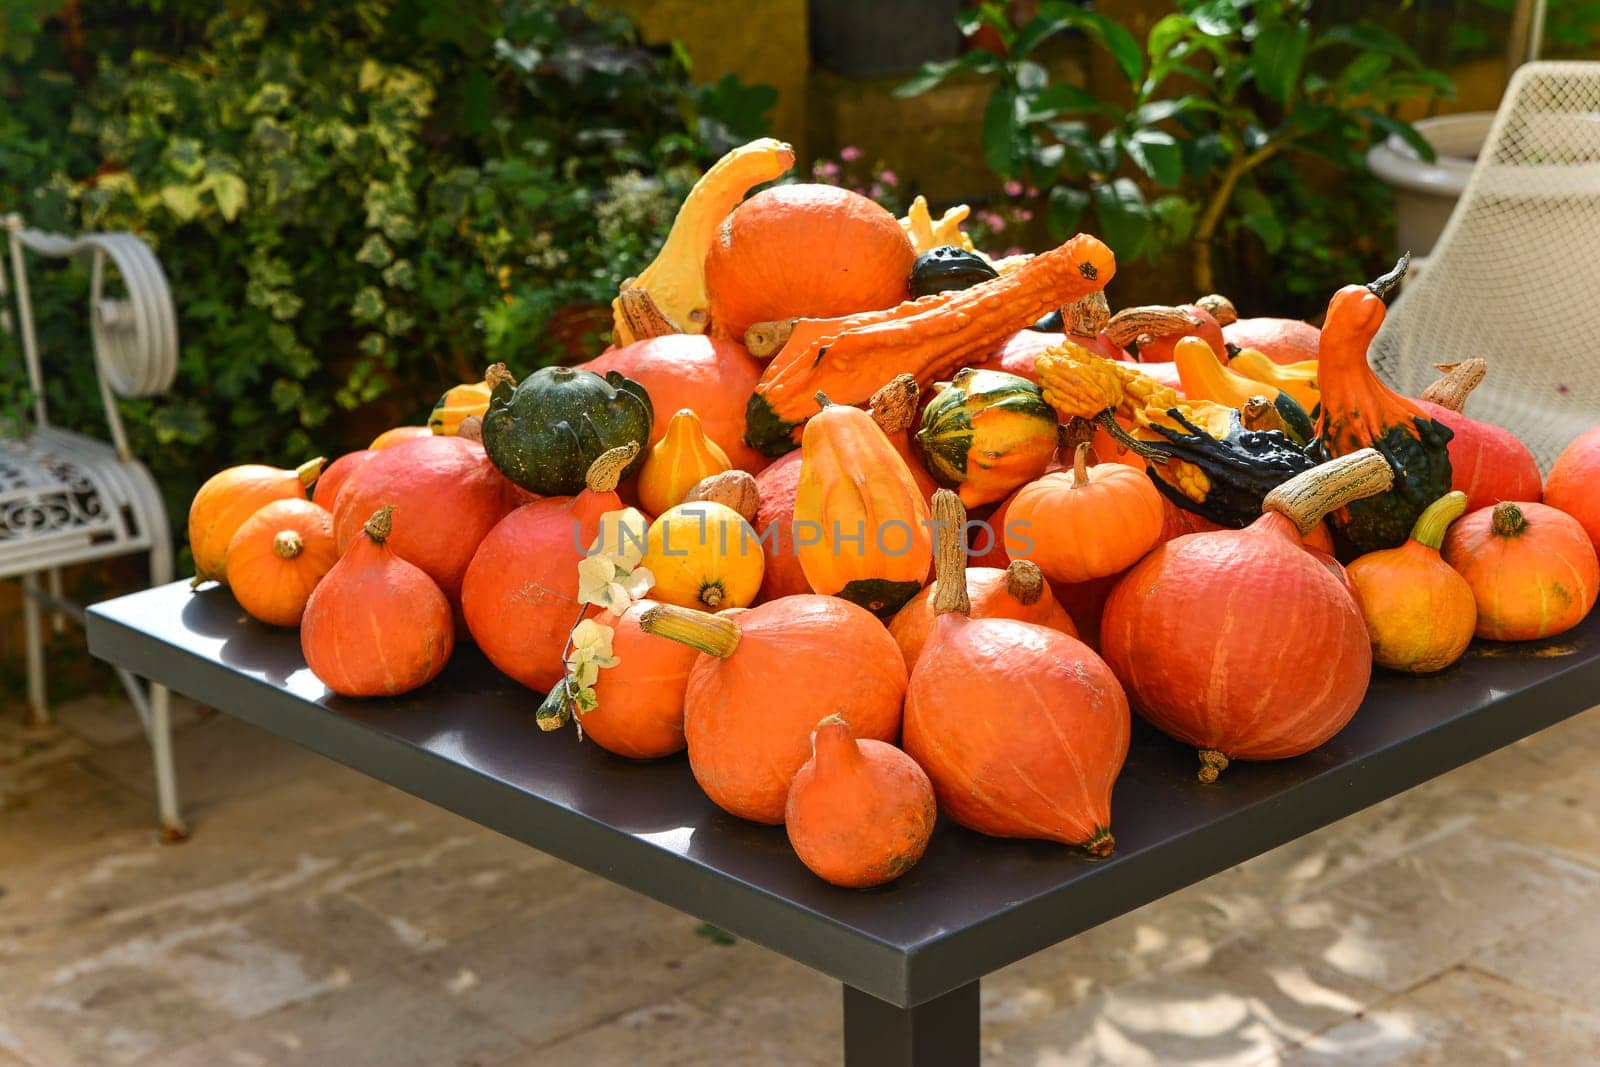 Many different pumpkins and squash on a table in the garden